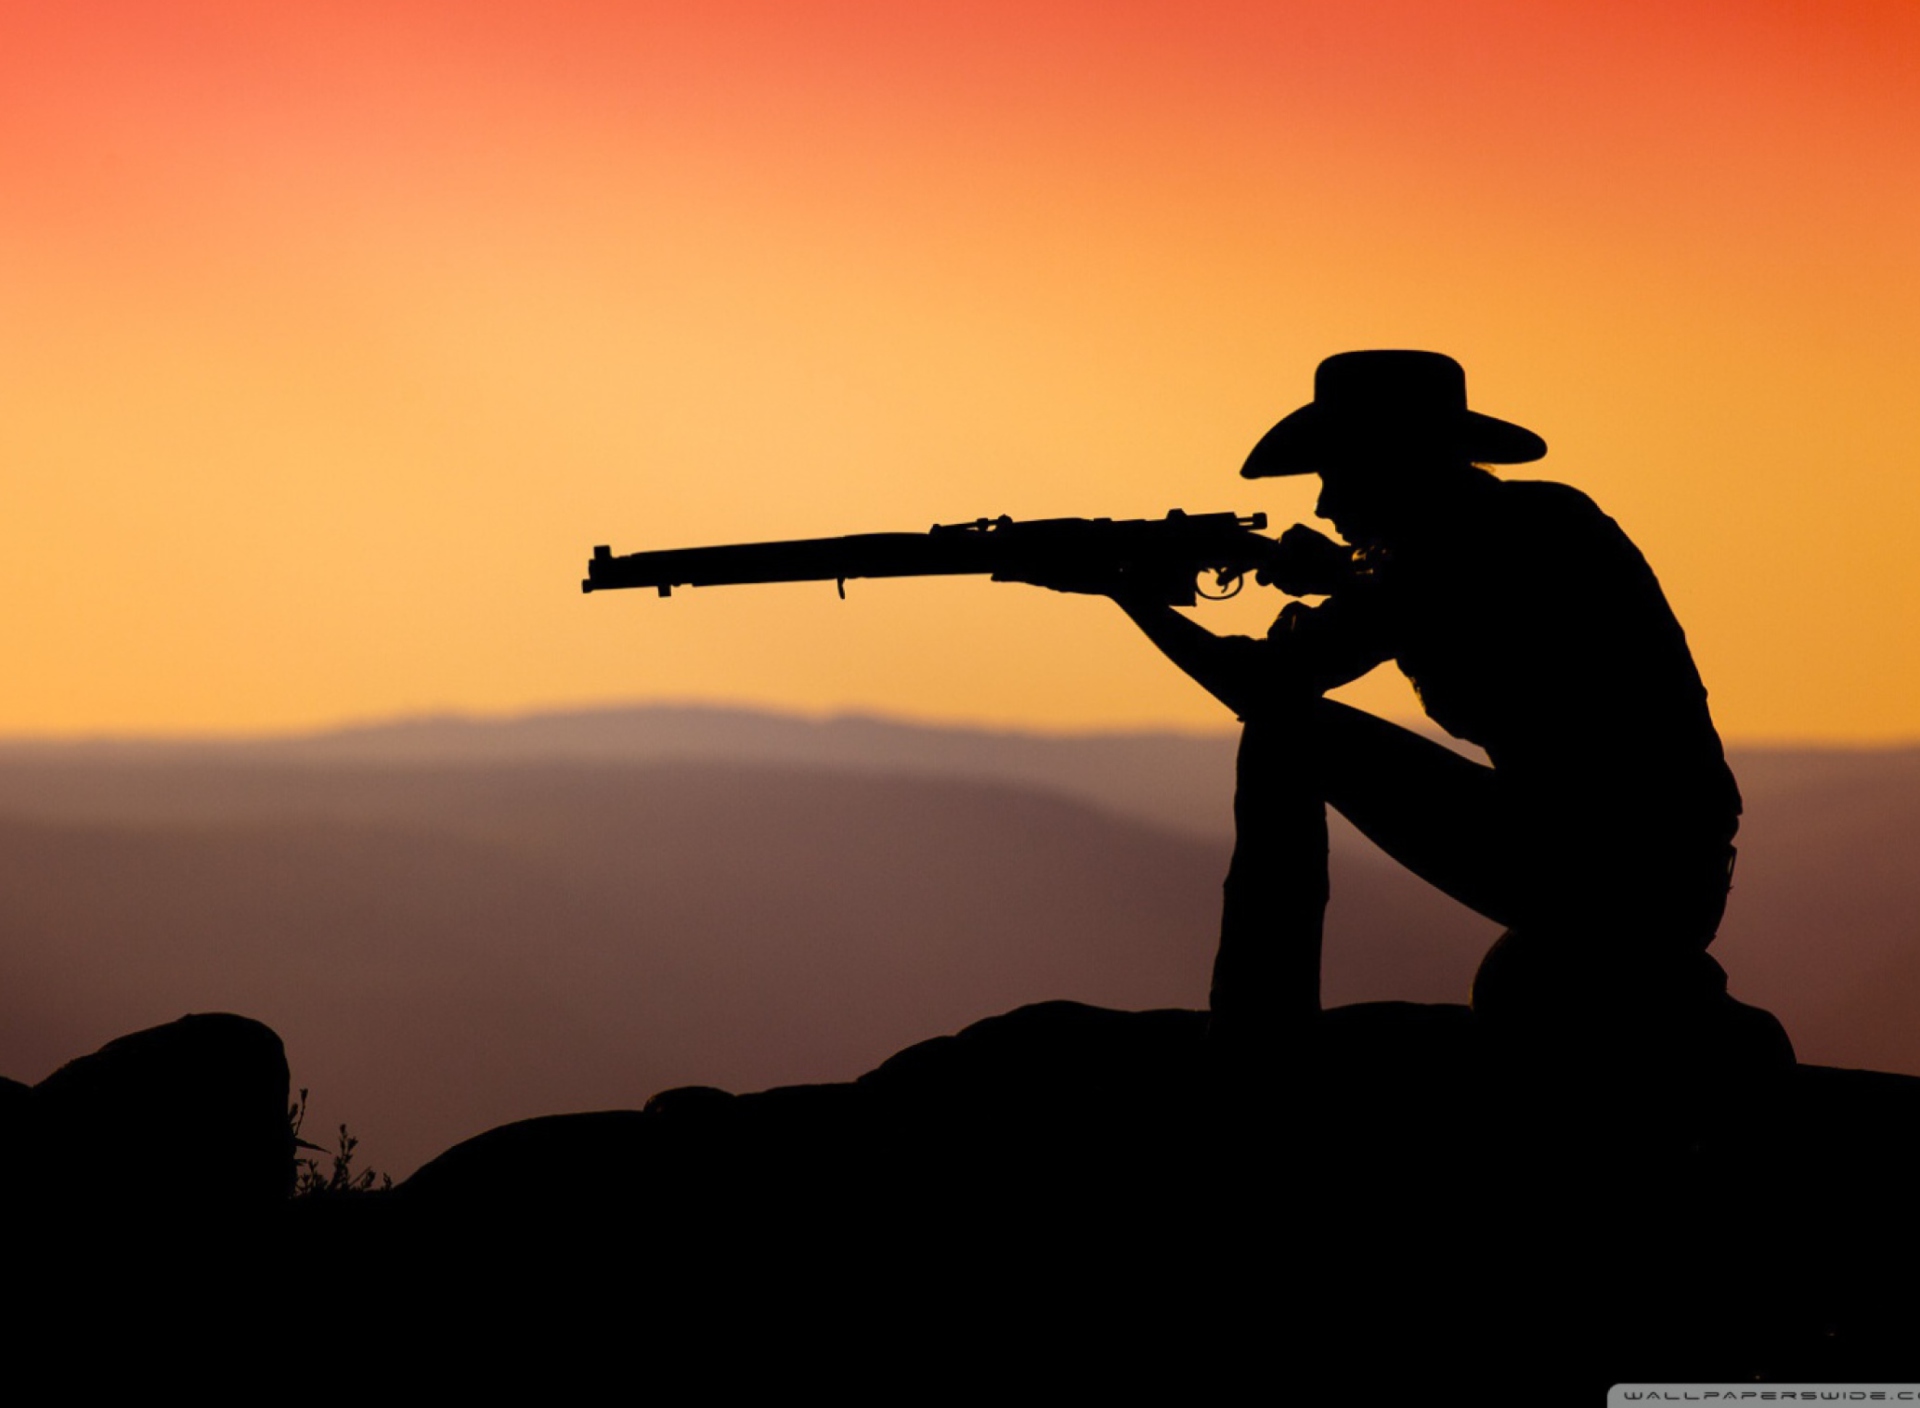 Cowboy Shooting In The Sunset wallpaper 1920x1408